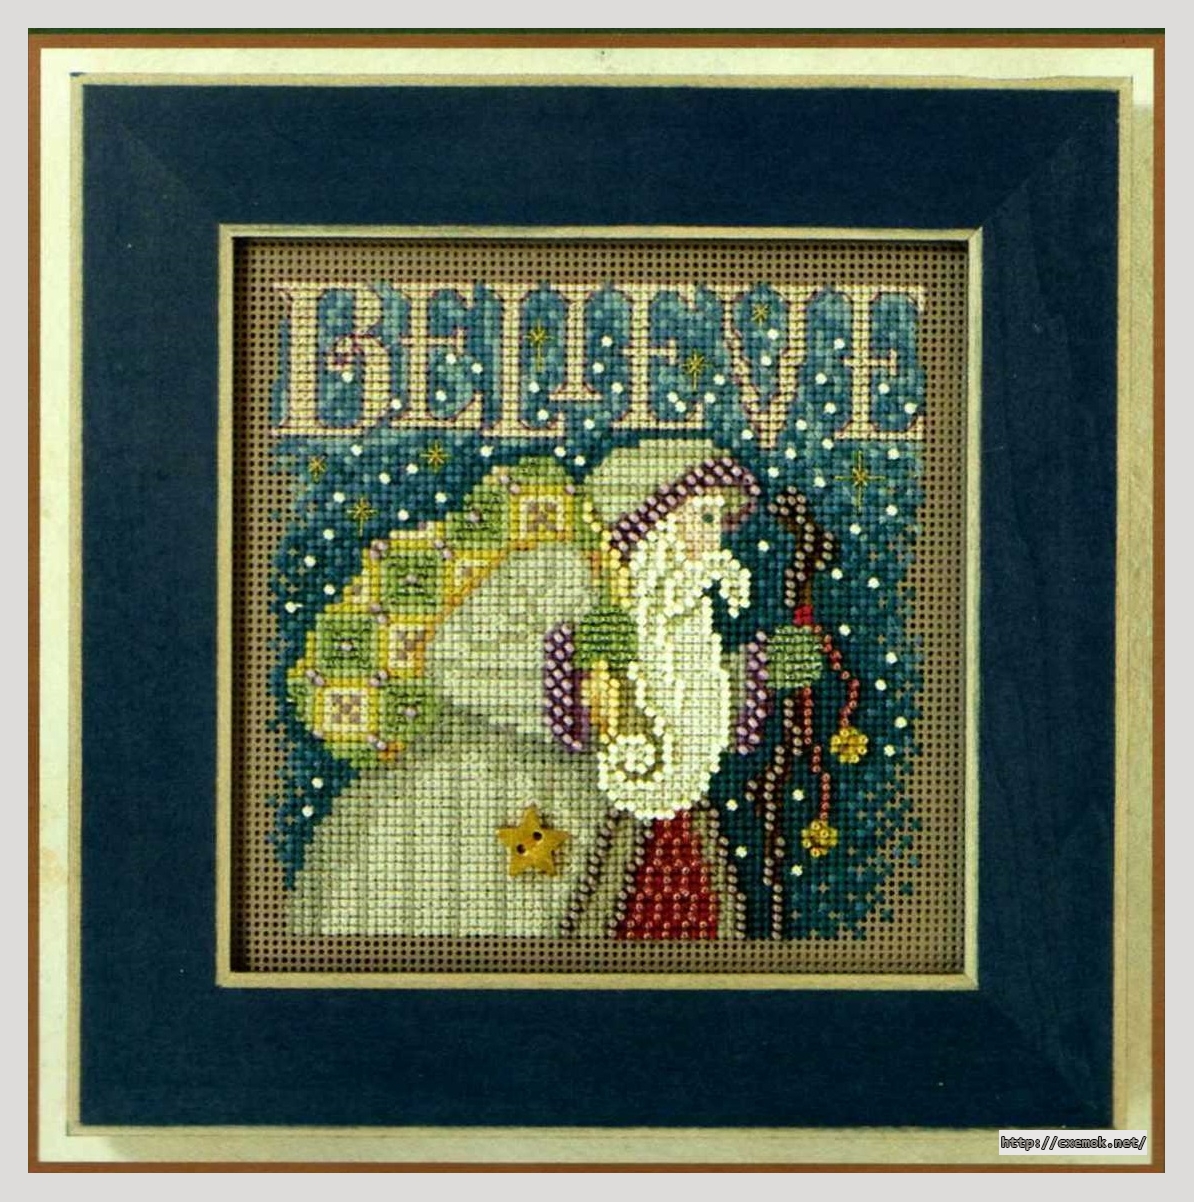 Download embroidery patterns by cross-stitch  - Believe, author 